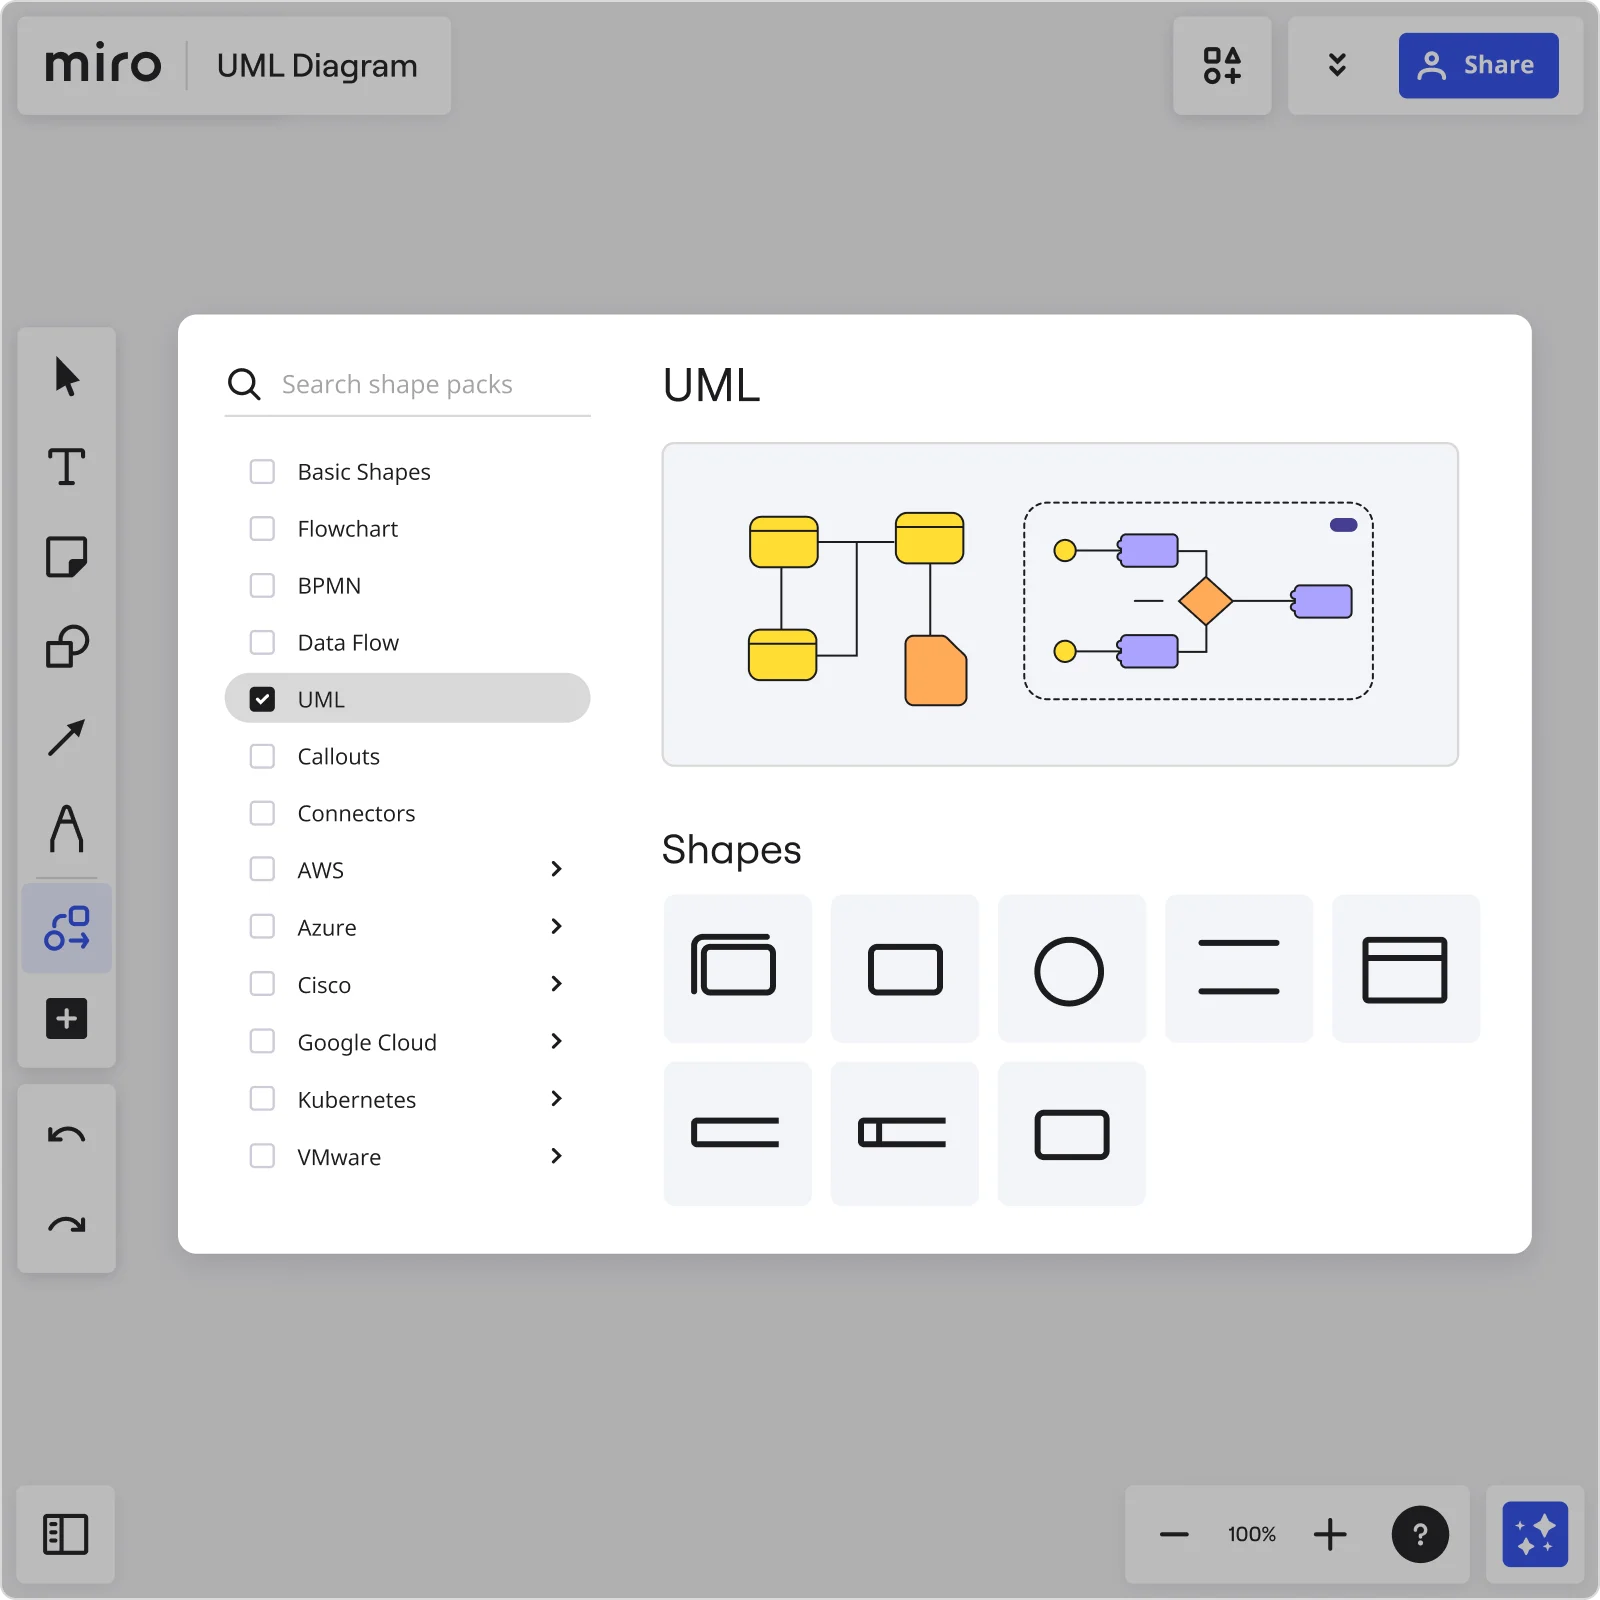 An image showing how to build a UML diagram in Miro using Miro's UML shape pack